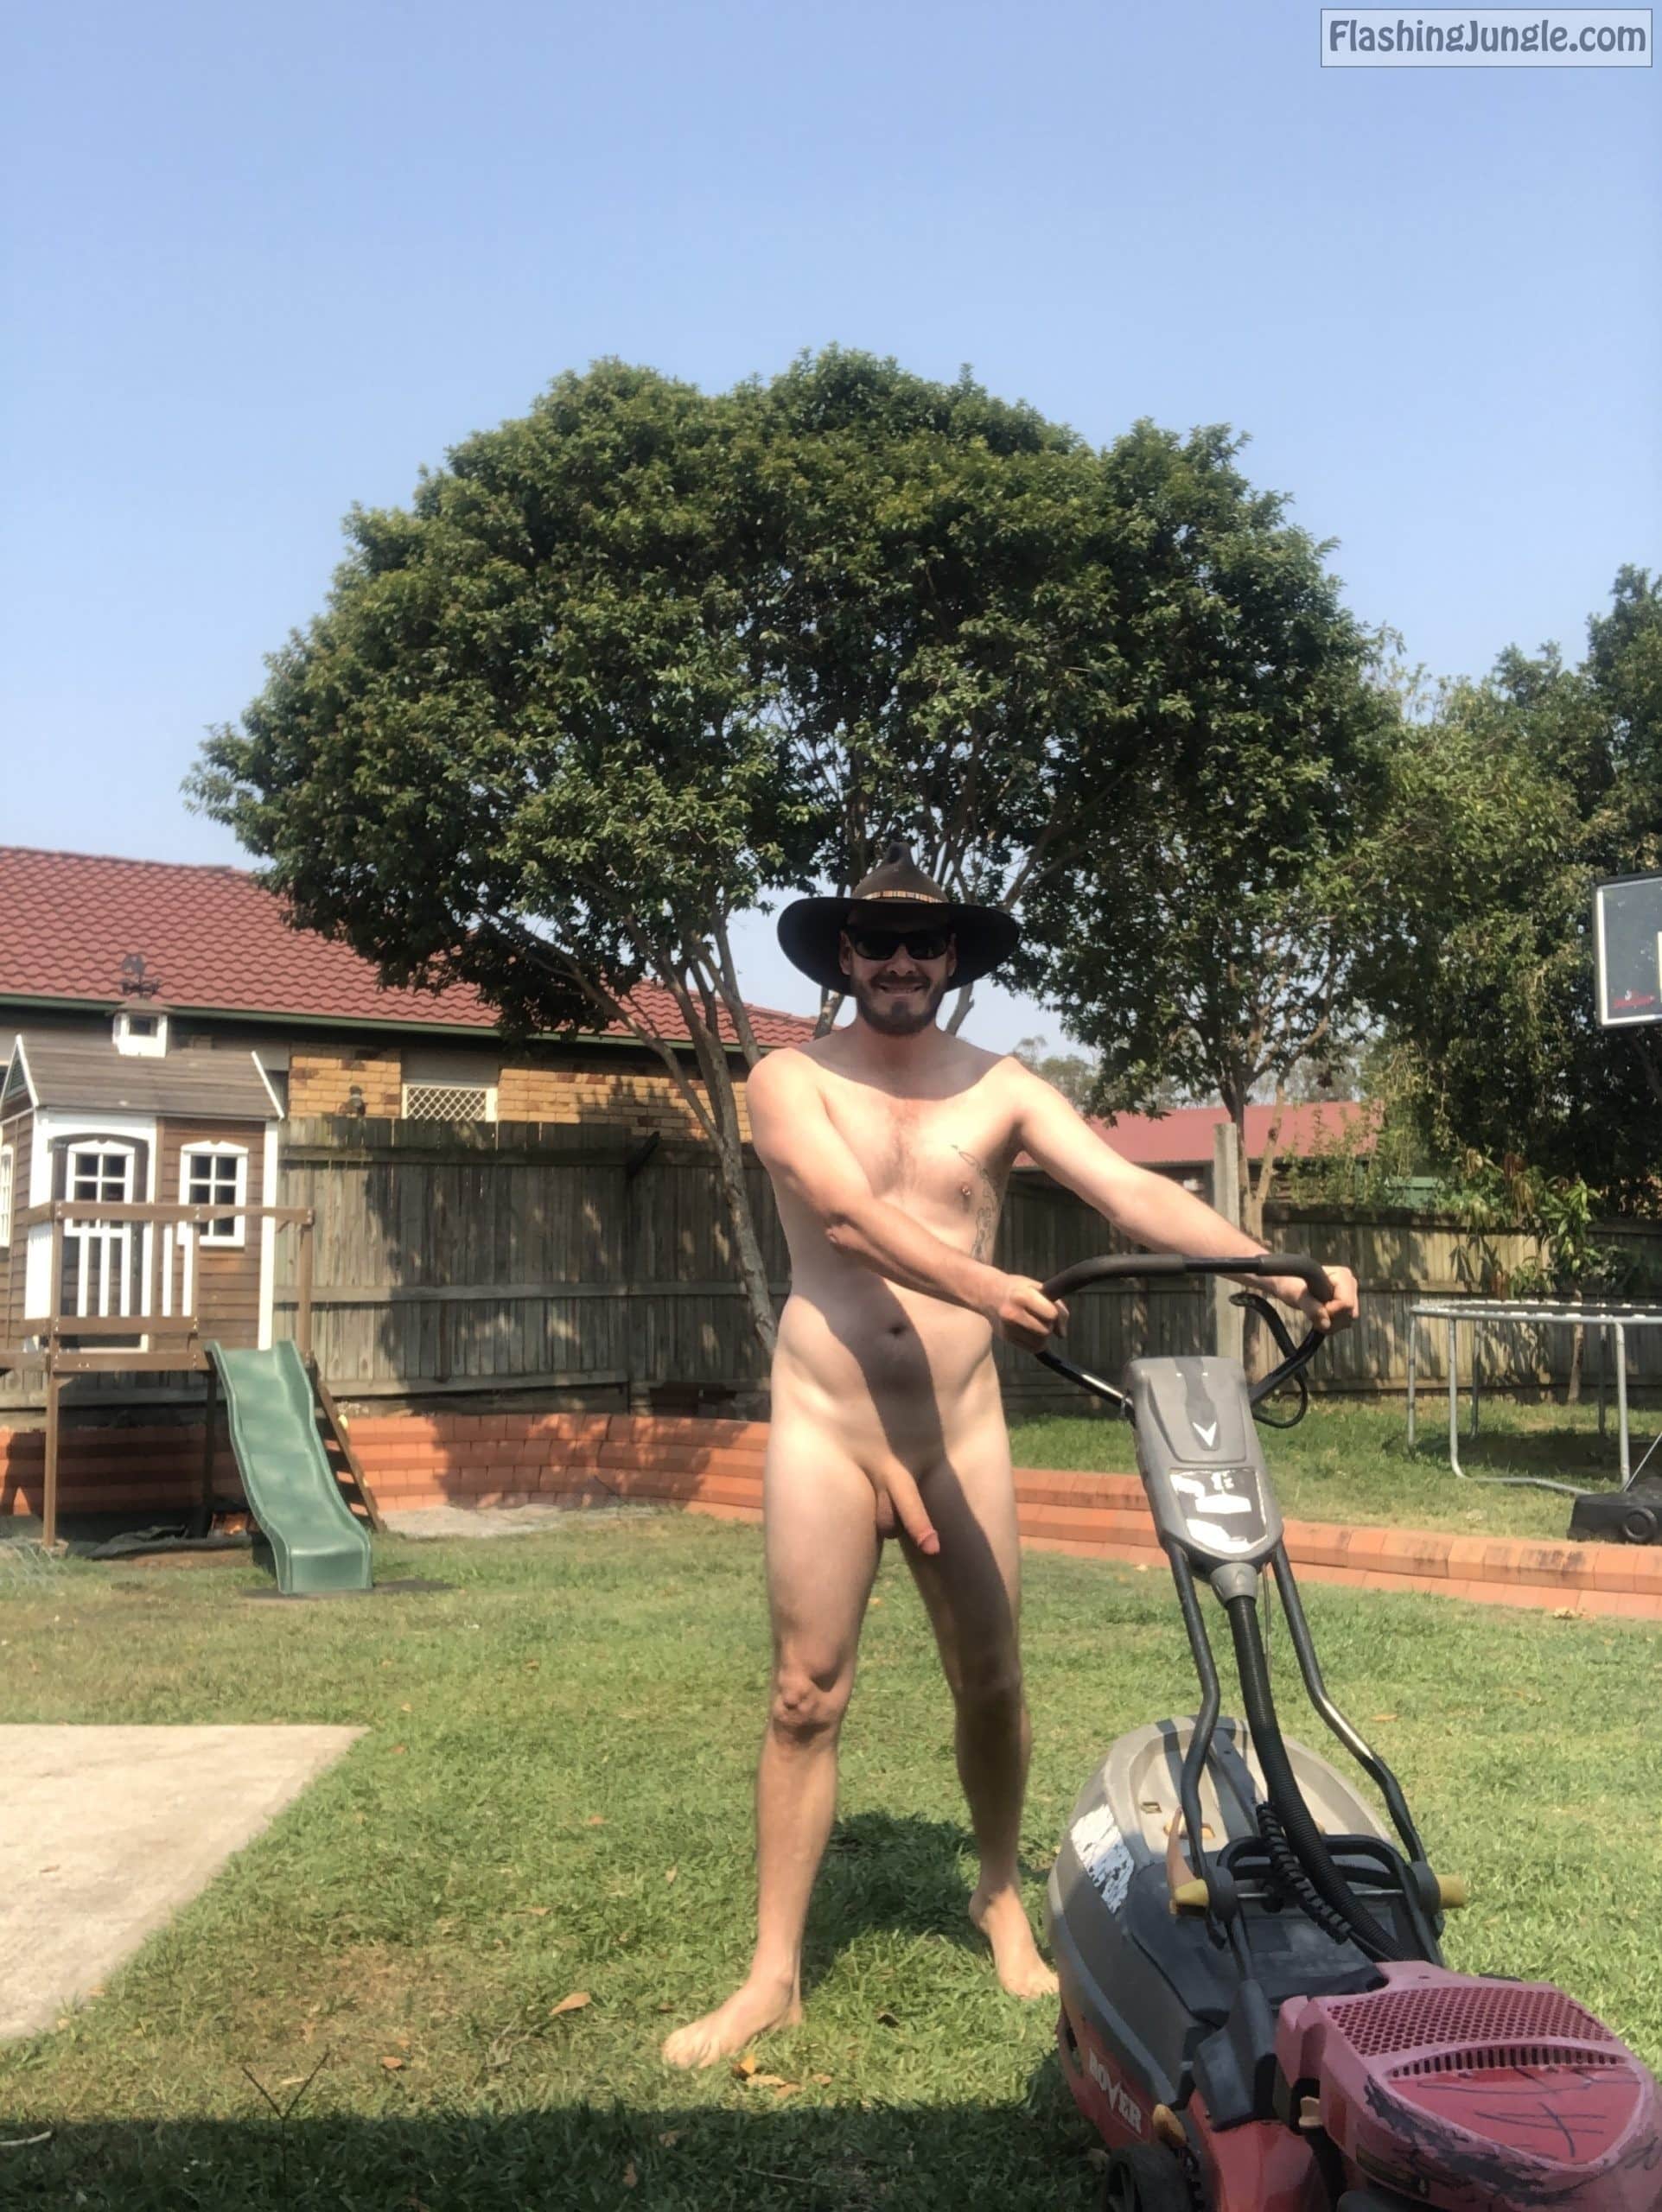 kamera Assassin Identificere Mowing day - Aussie nude in backyard Dick Flash Pics, Public Nudity Pics,  Real Amateurs from Google, Tumblr, Pinterest, Facebook, Twitter, Instagram  and Snapchat.